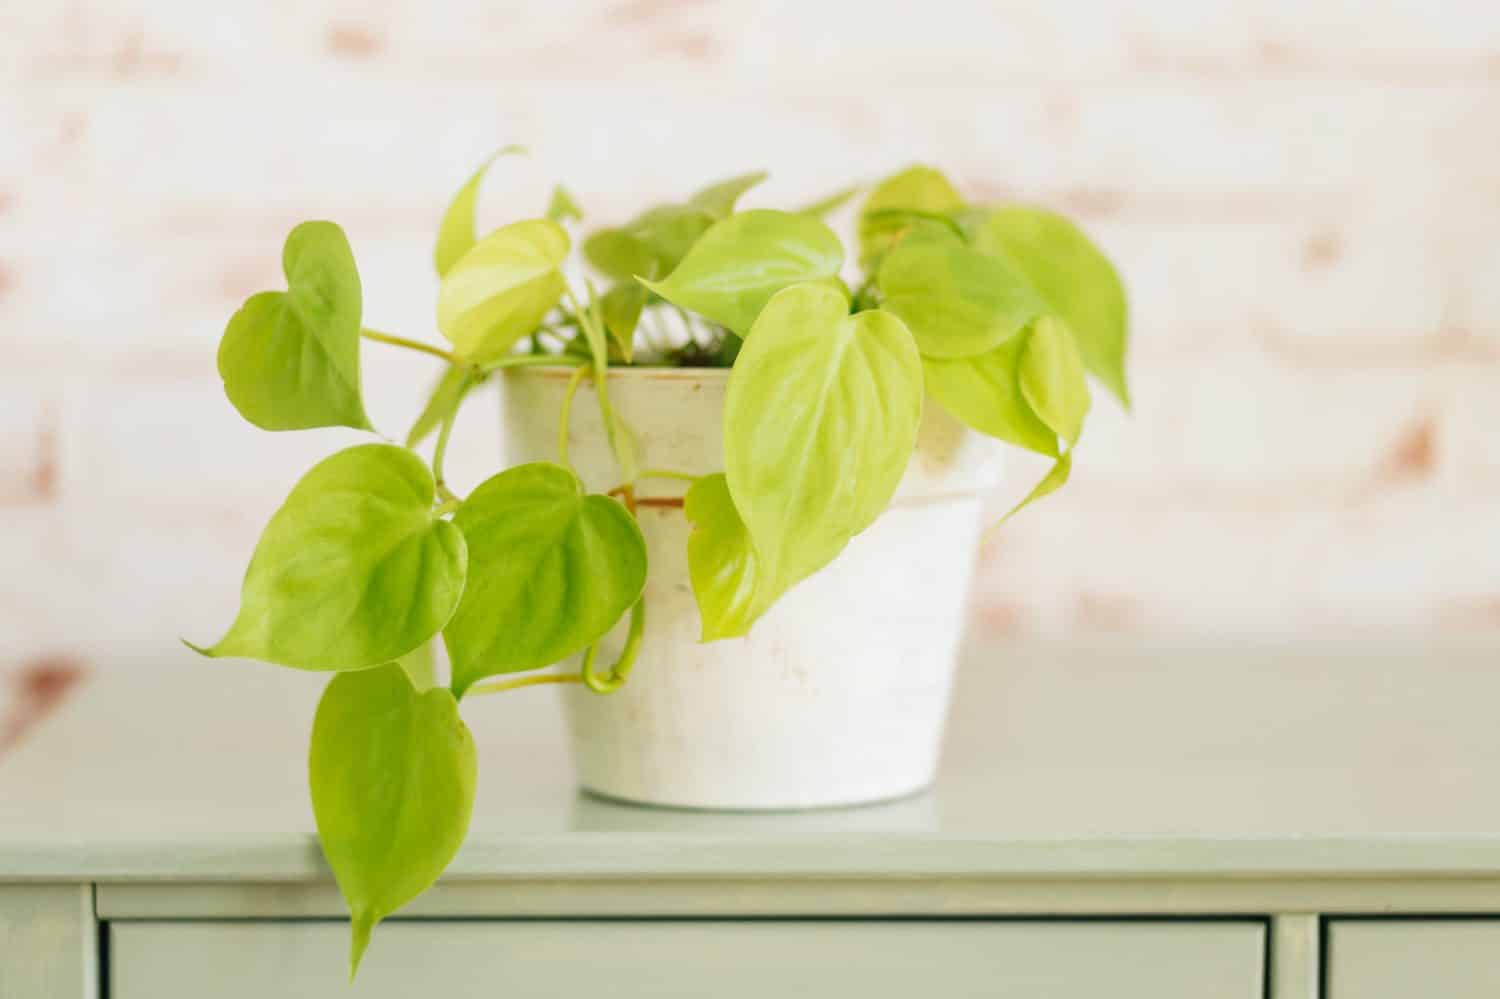 Philodendron Lemon Lime in white painted terracotta pot against red brick wallpaper in background on mint green shelf.